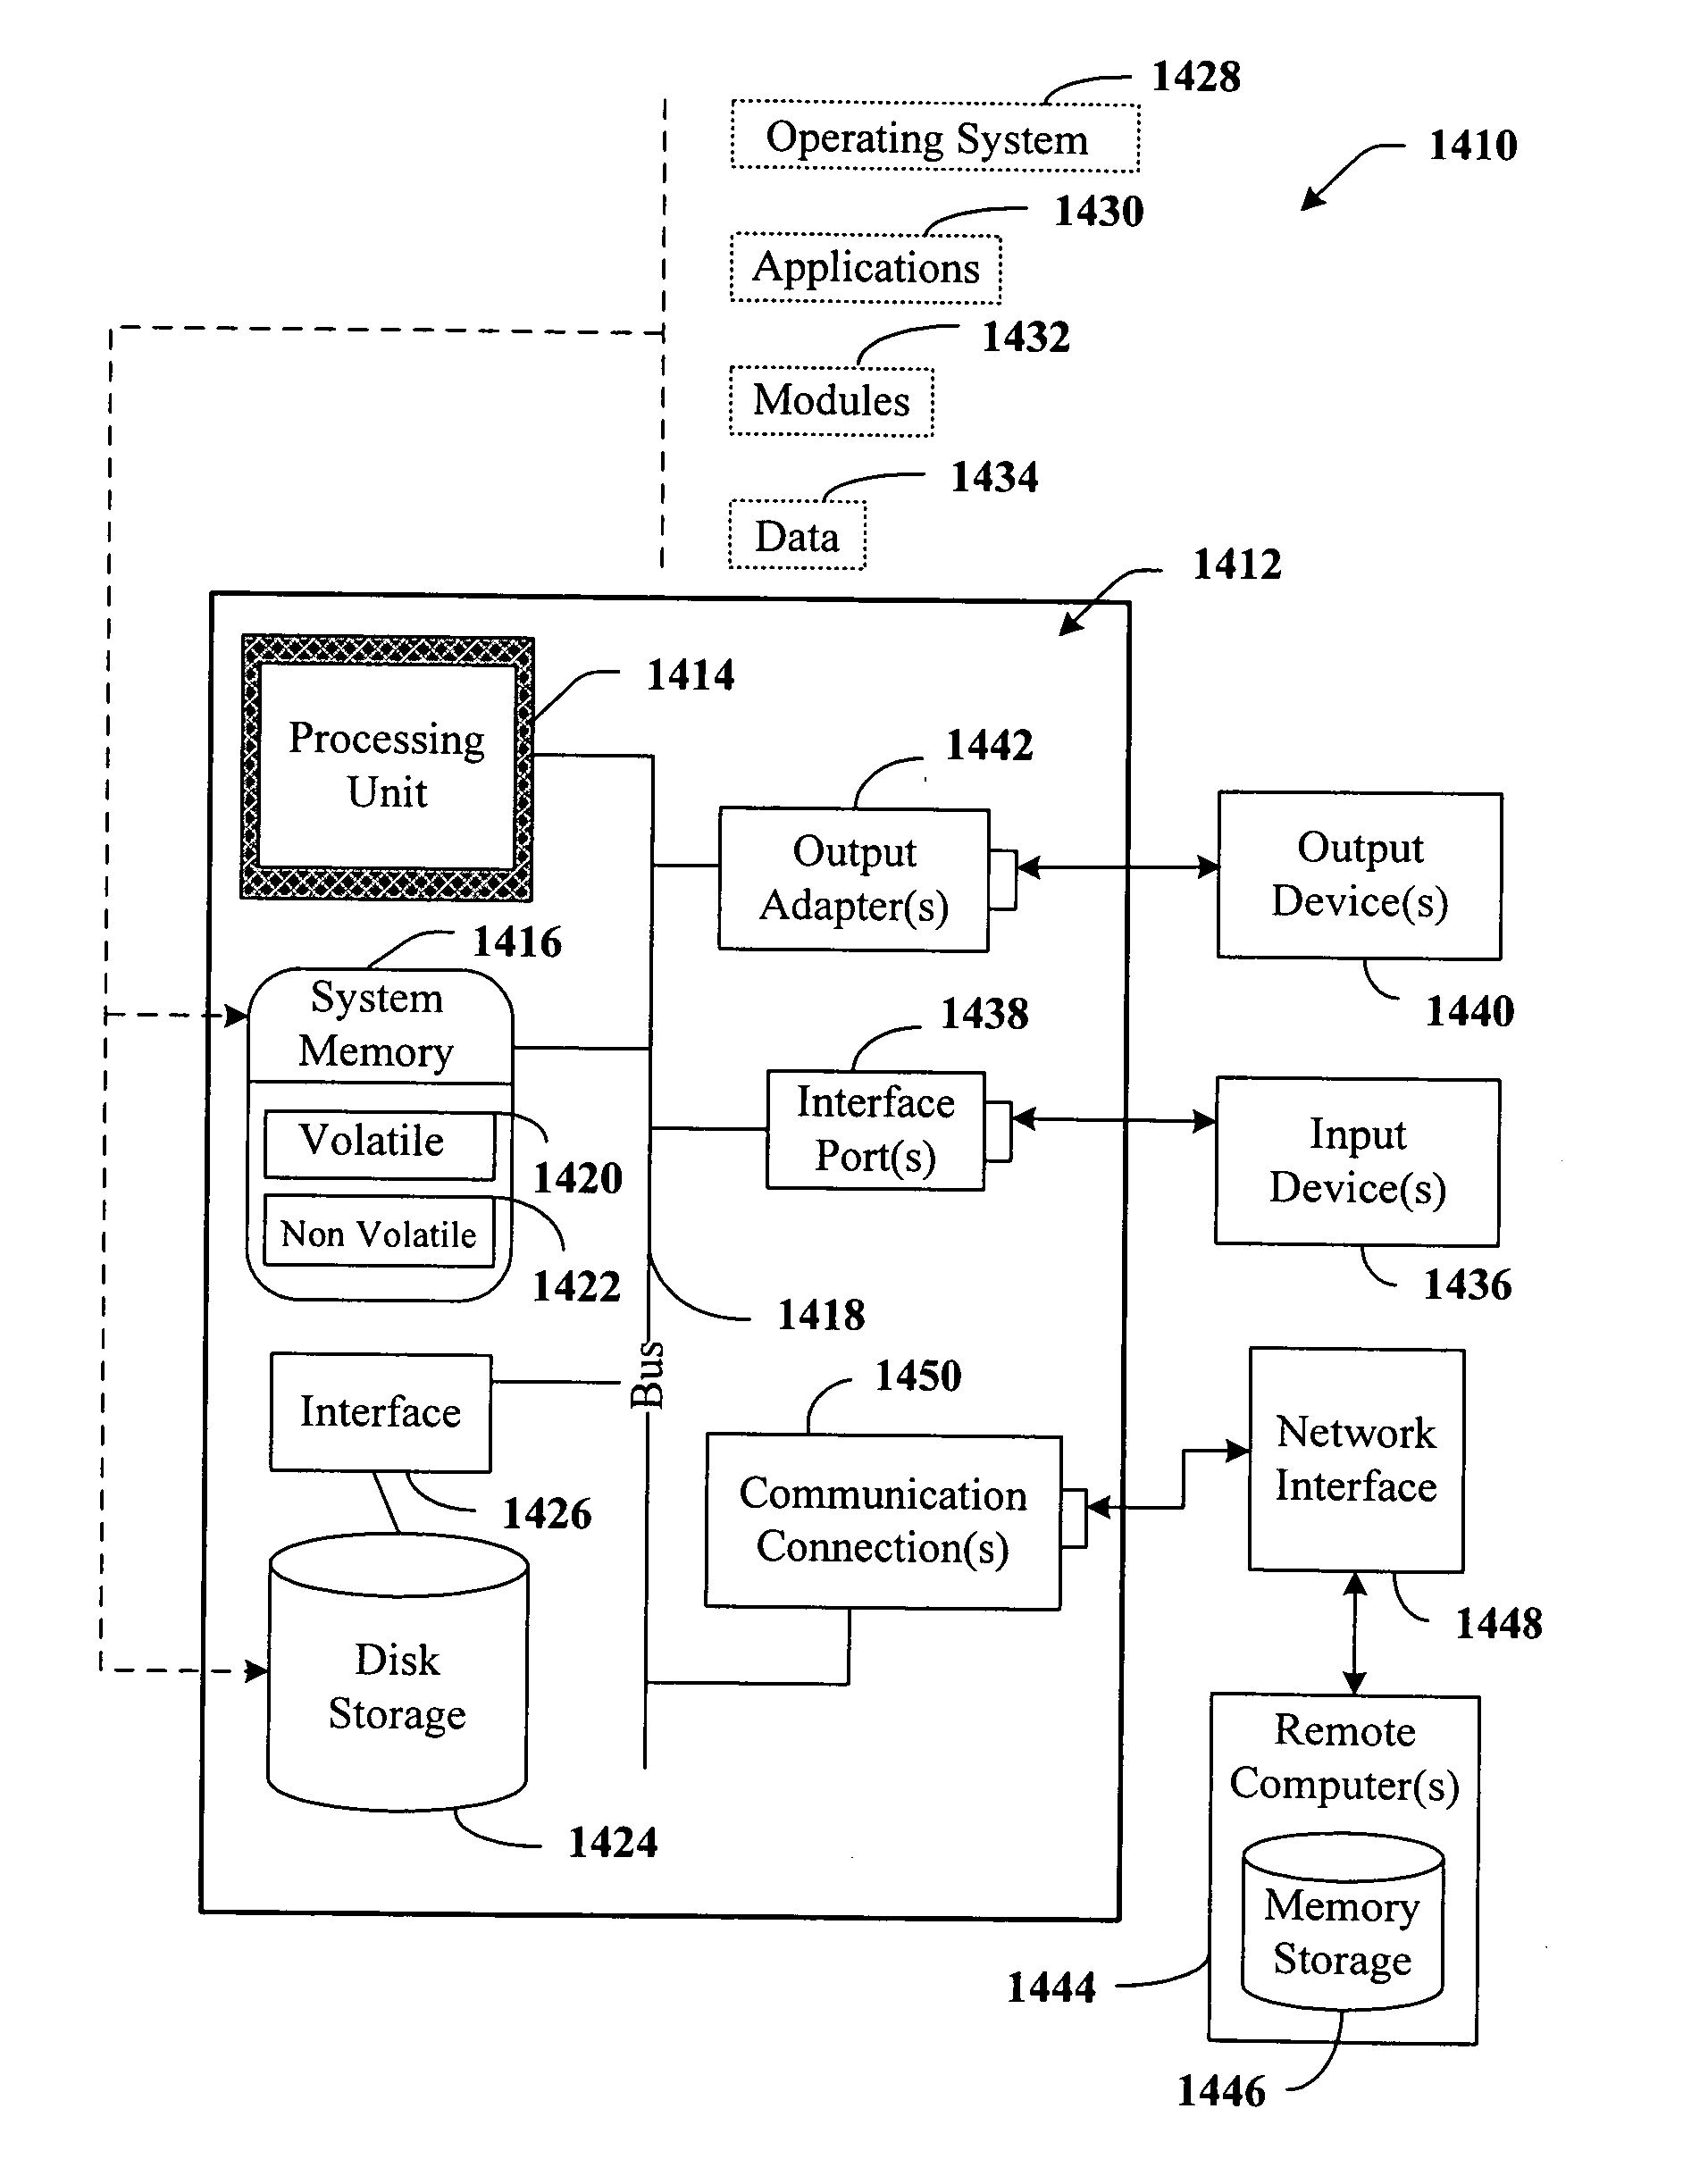 Systems, methods, and interfaces for providing personalized search and information access